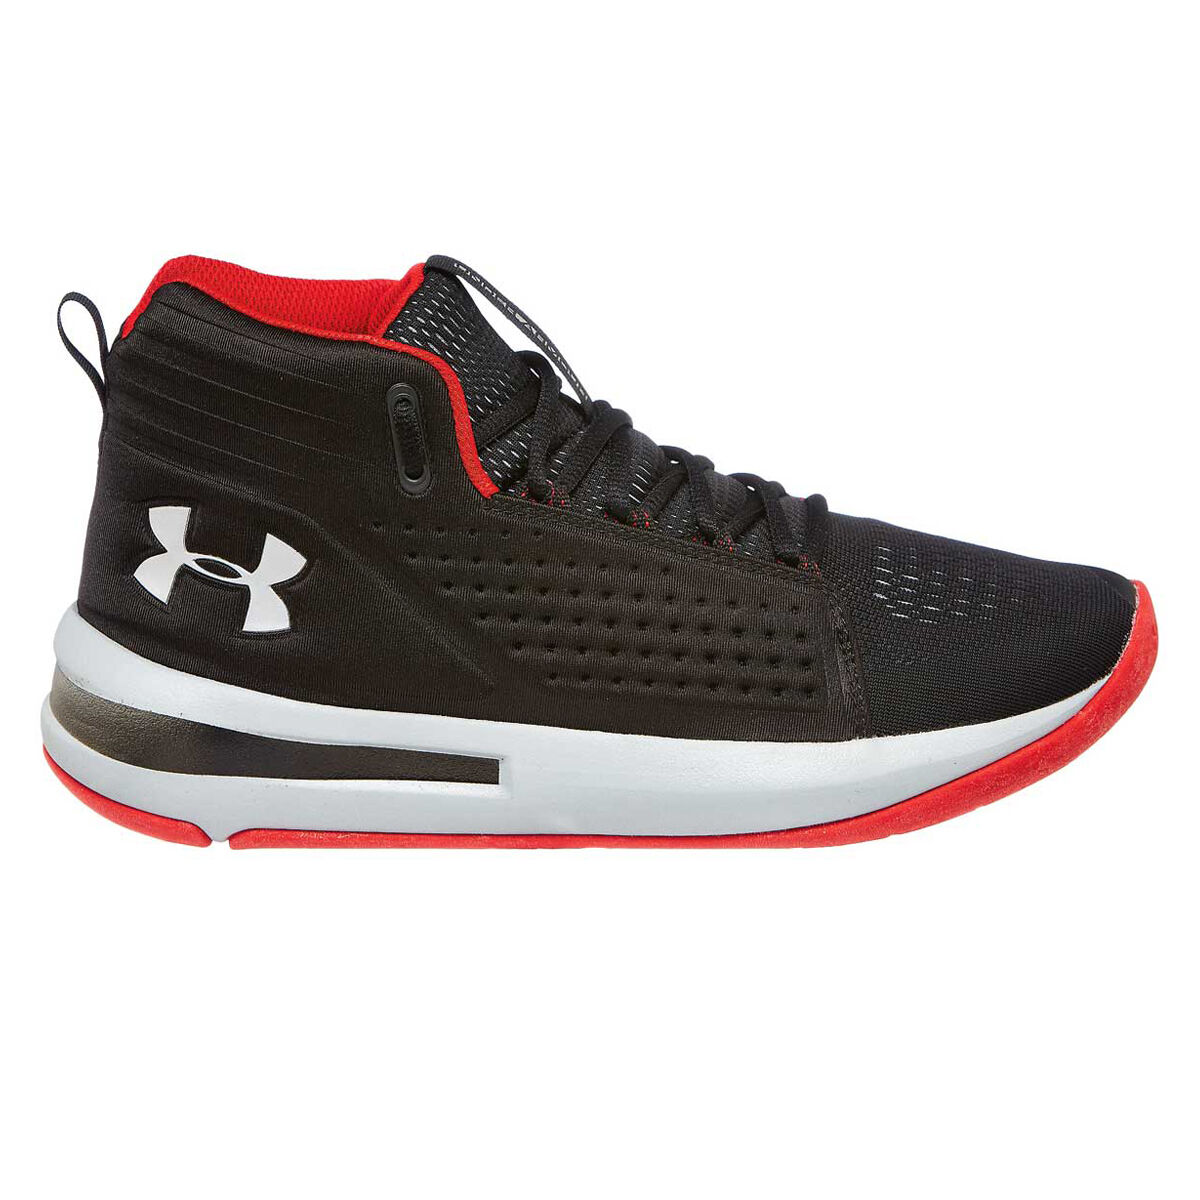 Under Armour Torch Mens Basketball 